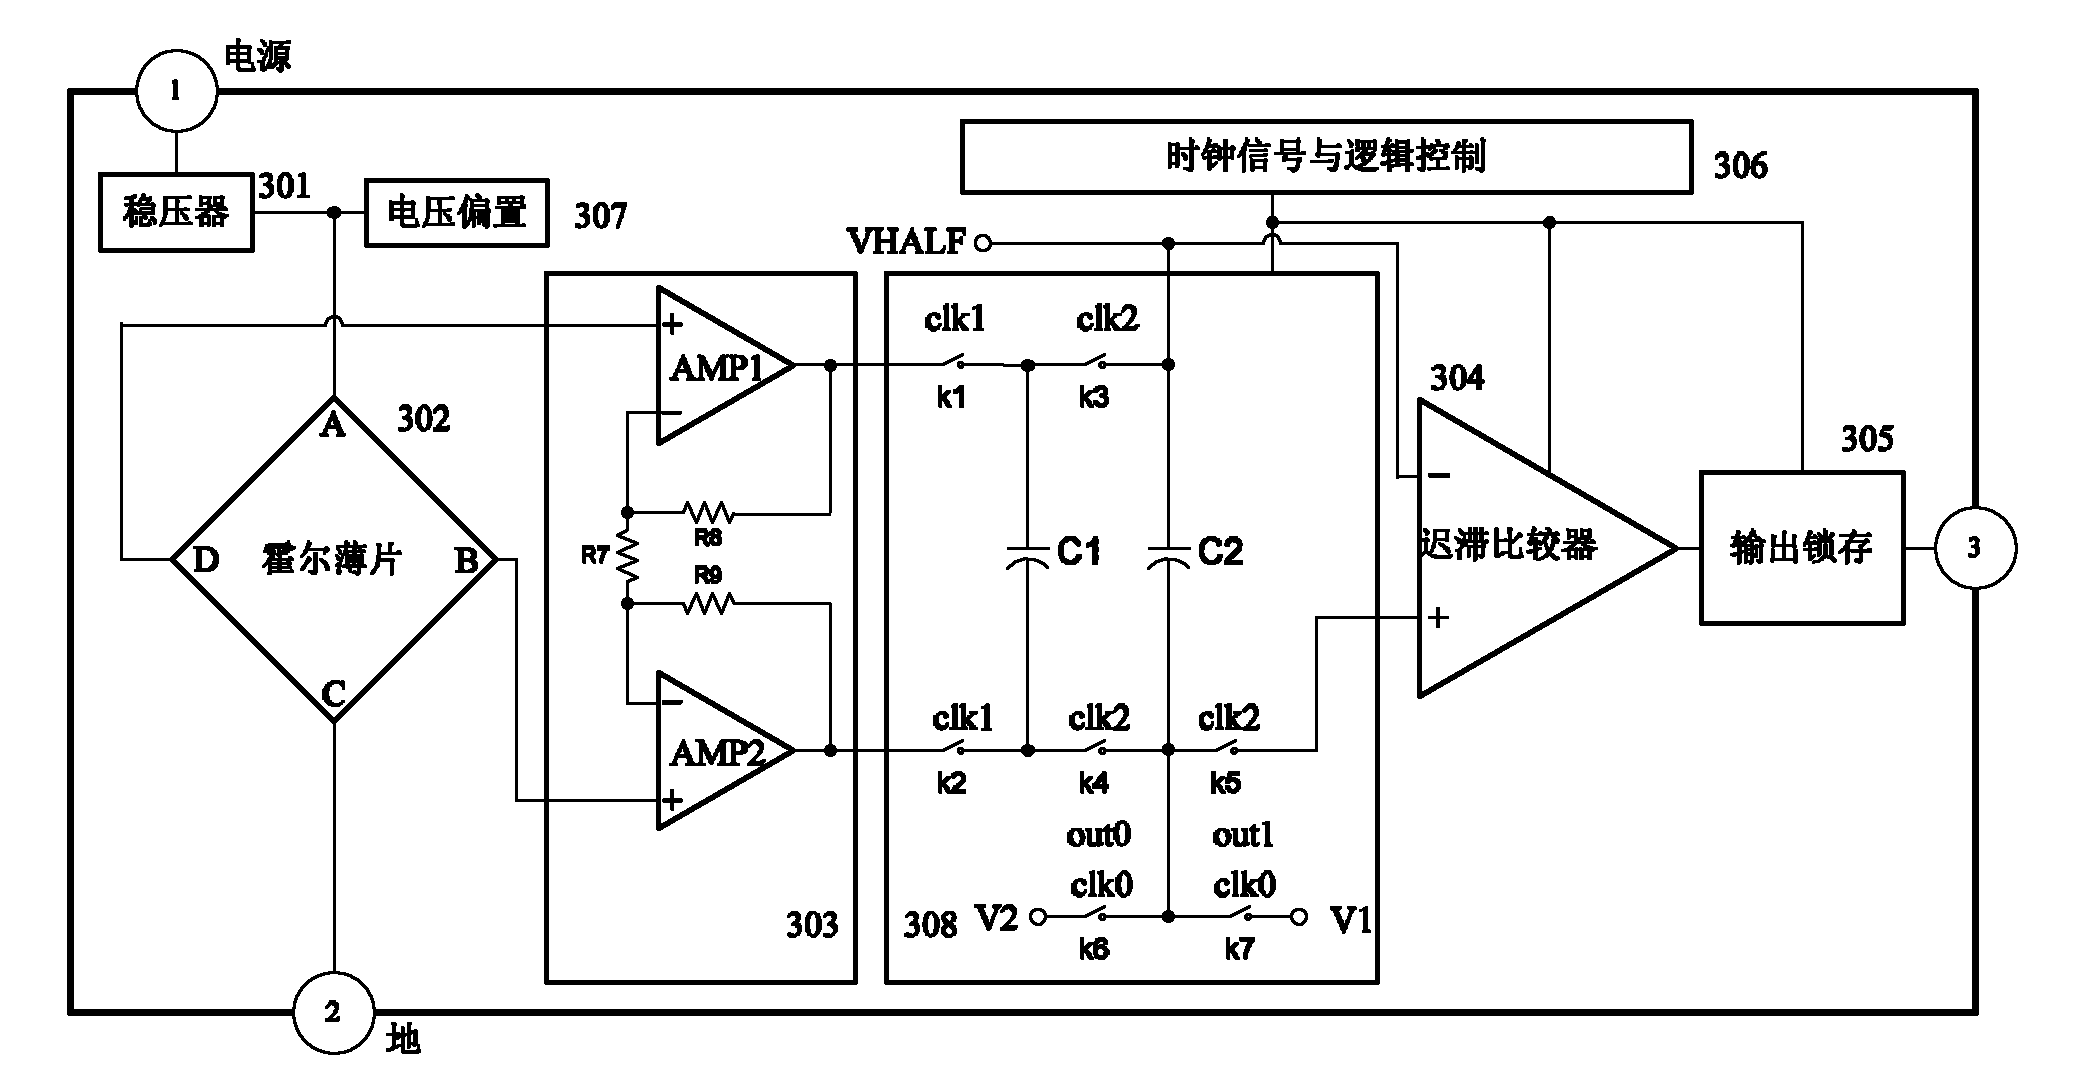 Temperature compensation method of Hall switch based on CMOS (complementary metal oxide semiconductor) technology and circuit thereof